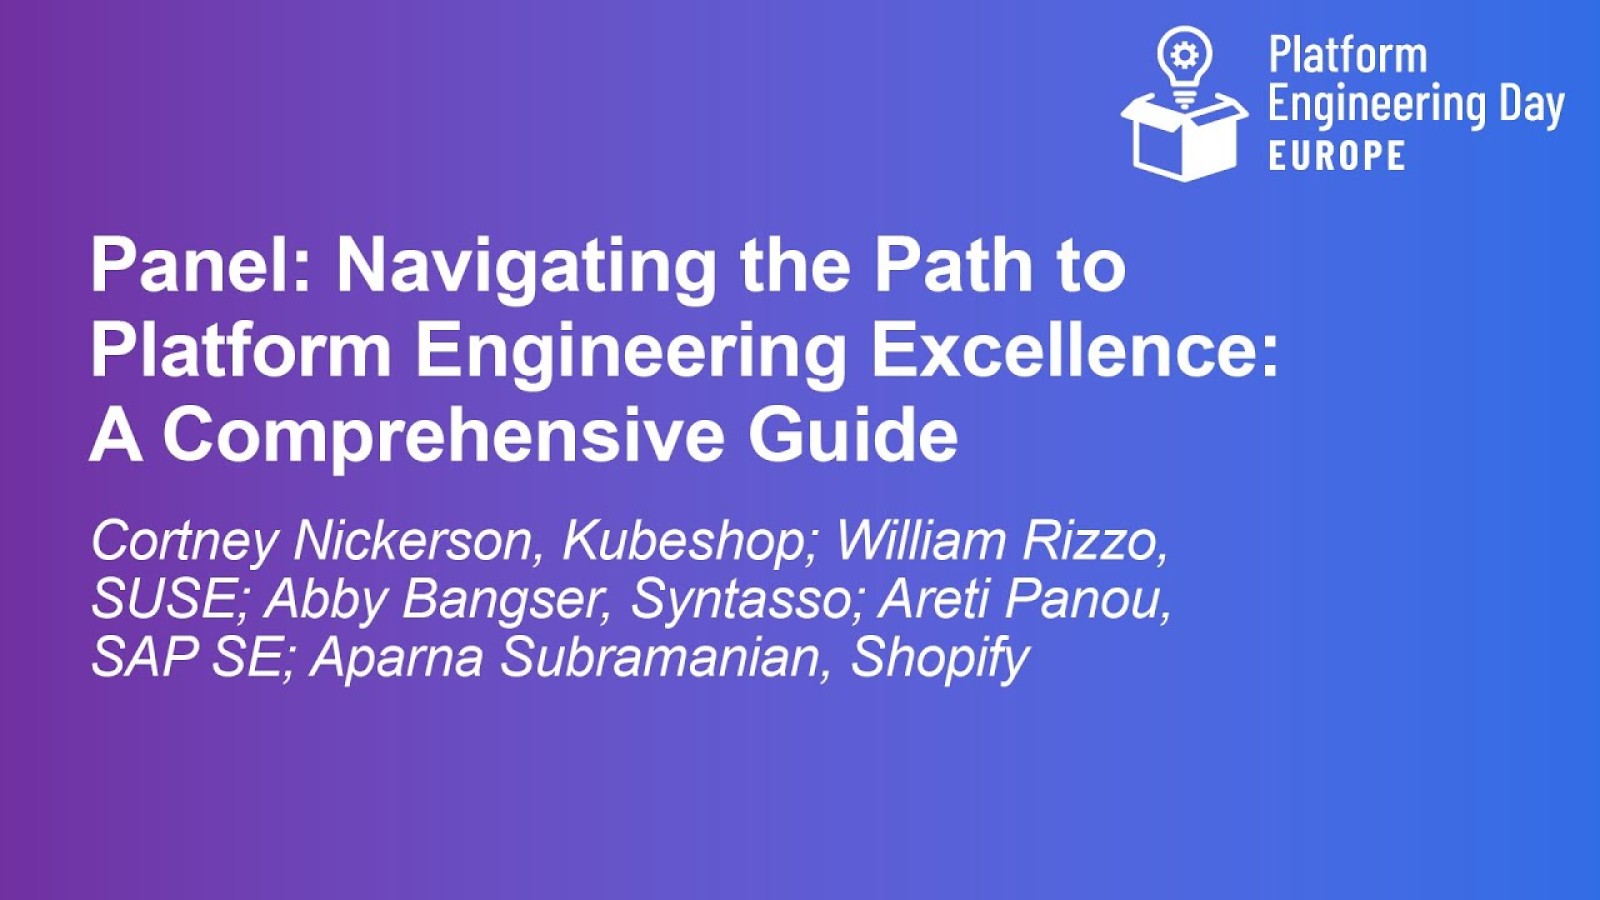 Navigating the Path to Platform Engineering Excellence - A Comprehensive Guide